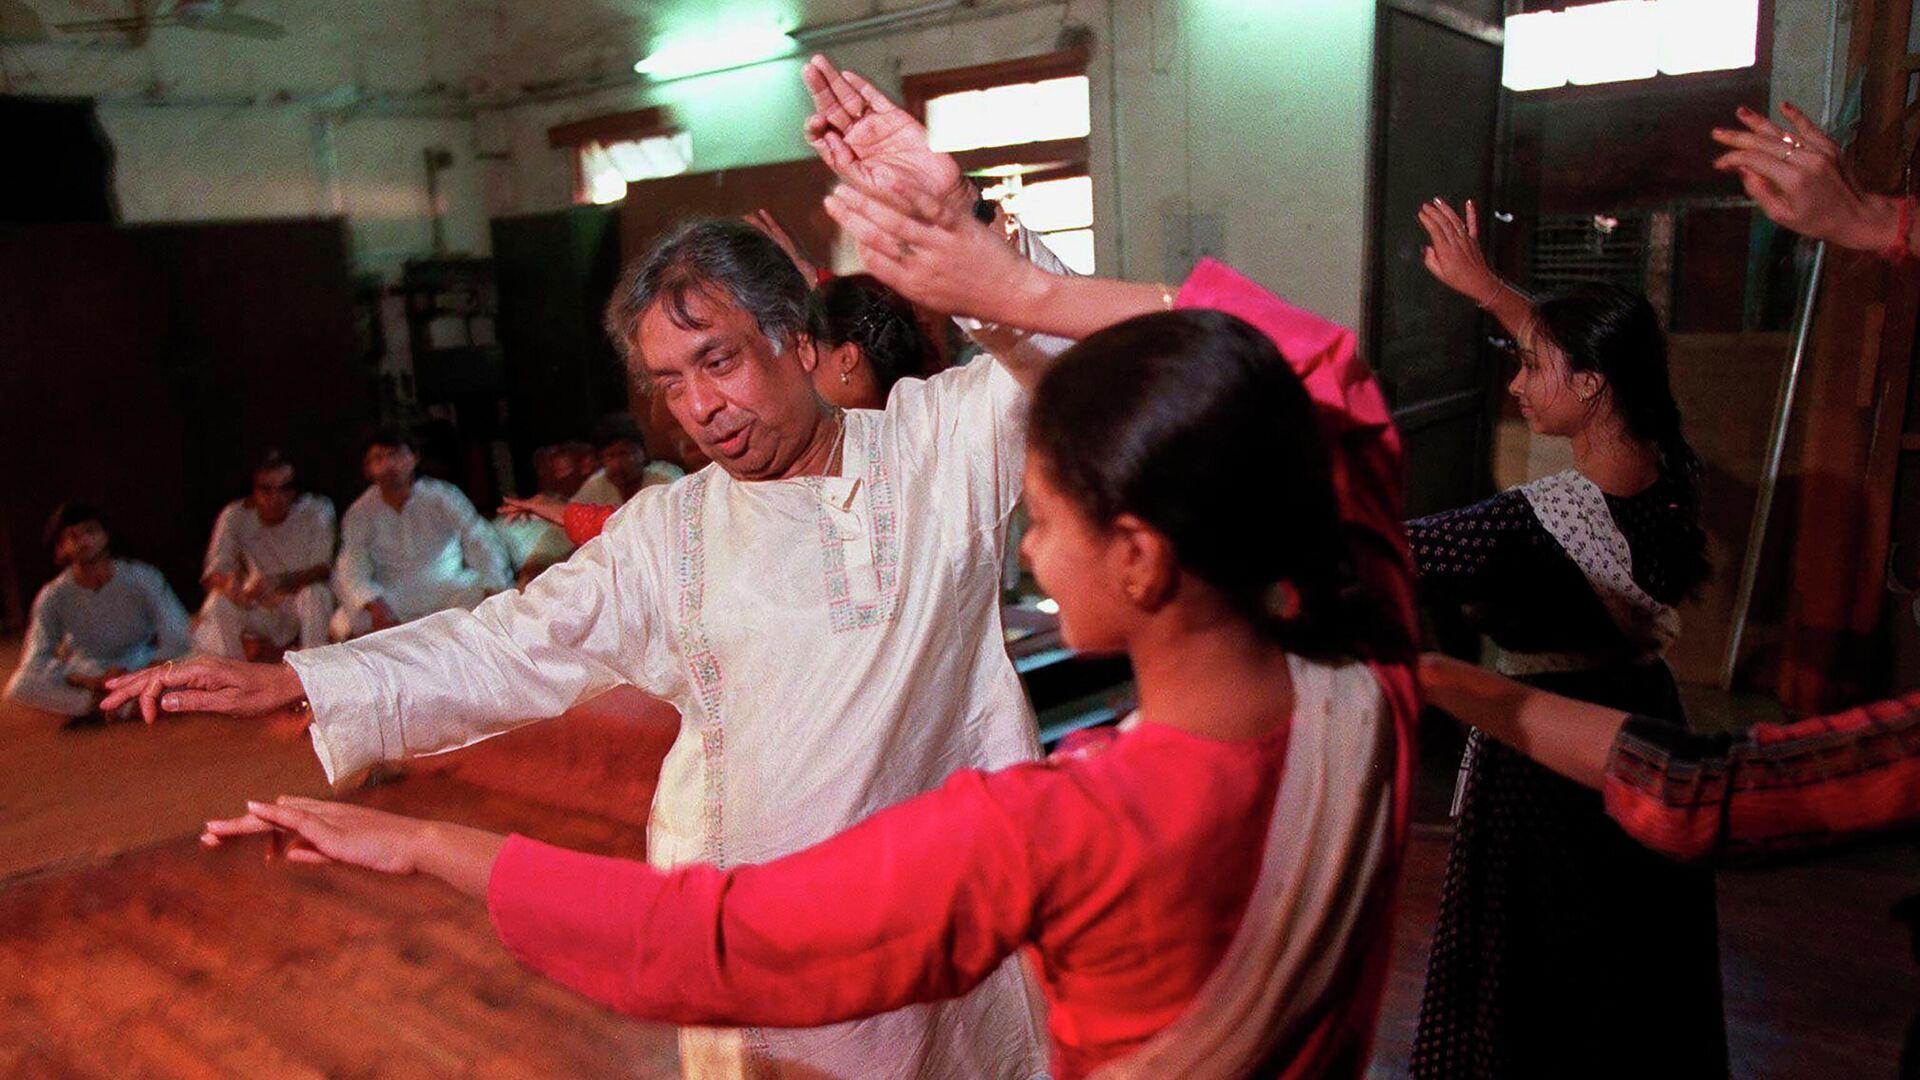 FILE - Indian classical Kathak dance guru Birju Maharaj teaches students at his studio in New Delhi on Sept. 26, 1997. Birju Maharaj, a legend of classical Indian dance and among the country’s most well-known performing artists, died early on Monday, Jan. 17, 2022 - Sputnik International, 1920, 17.01.2022